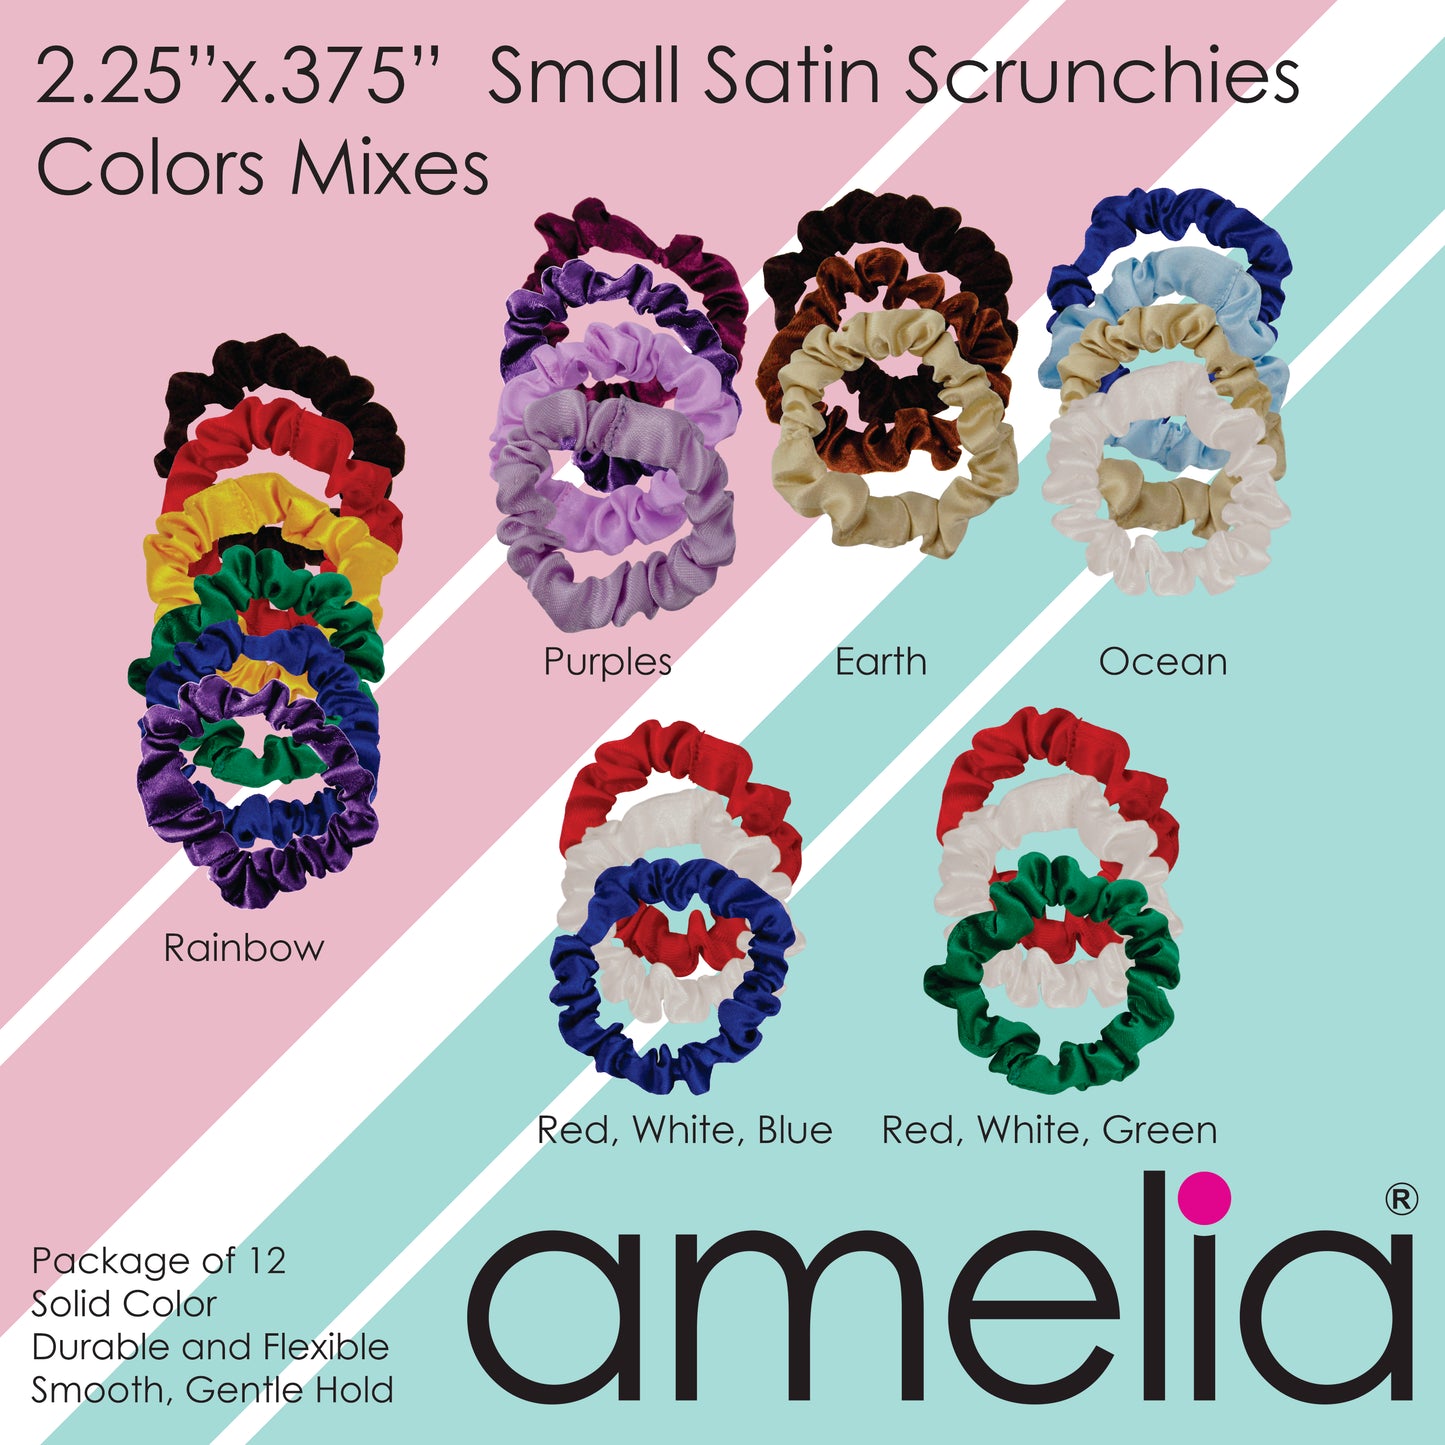 Amelia Beauty, Purple Satin Scrunchies, 2.25in Diameter, Gentle on Hair, Strong Hold, No Snag, No Dents or Creases. 12 Pack